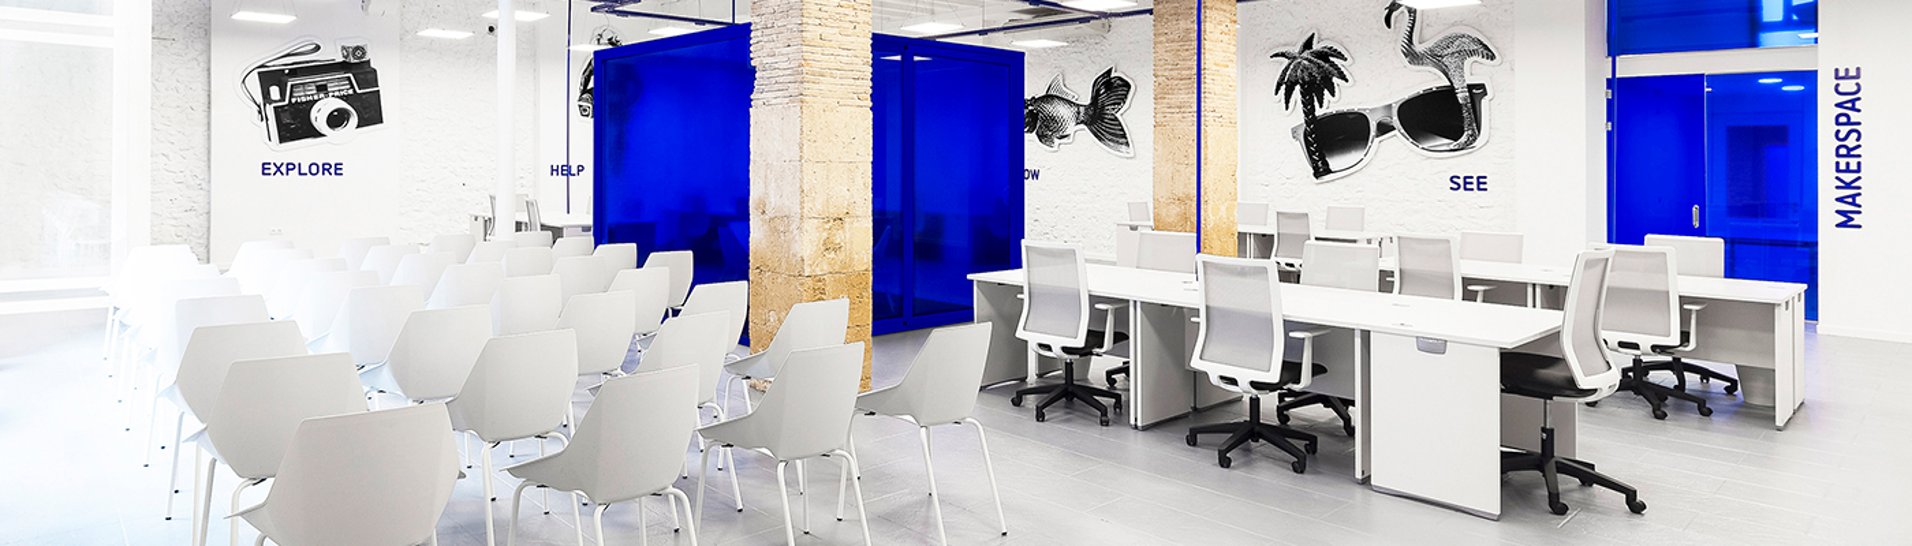 Tips for setting up a coworking office and making it work